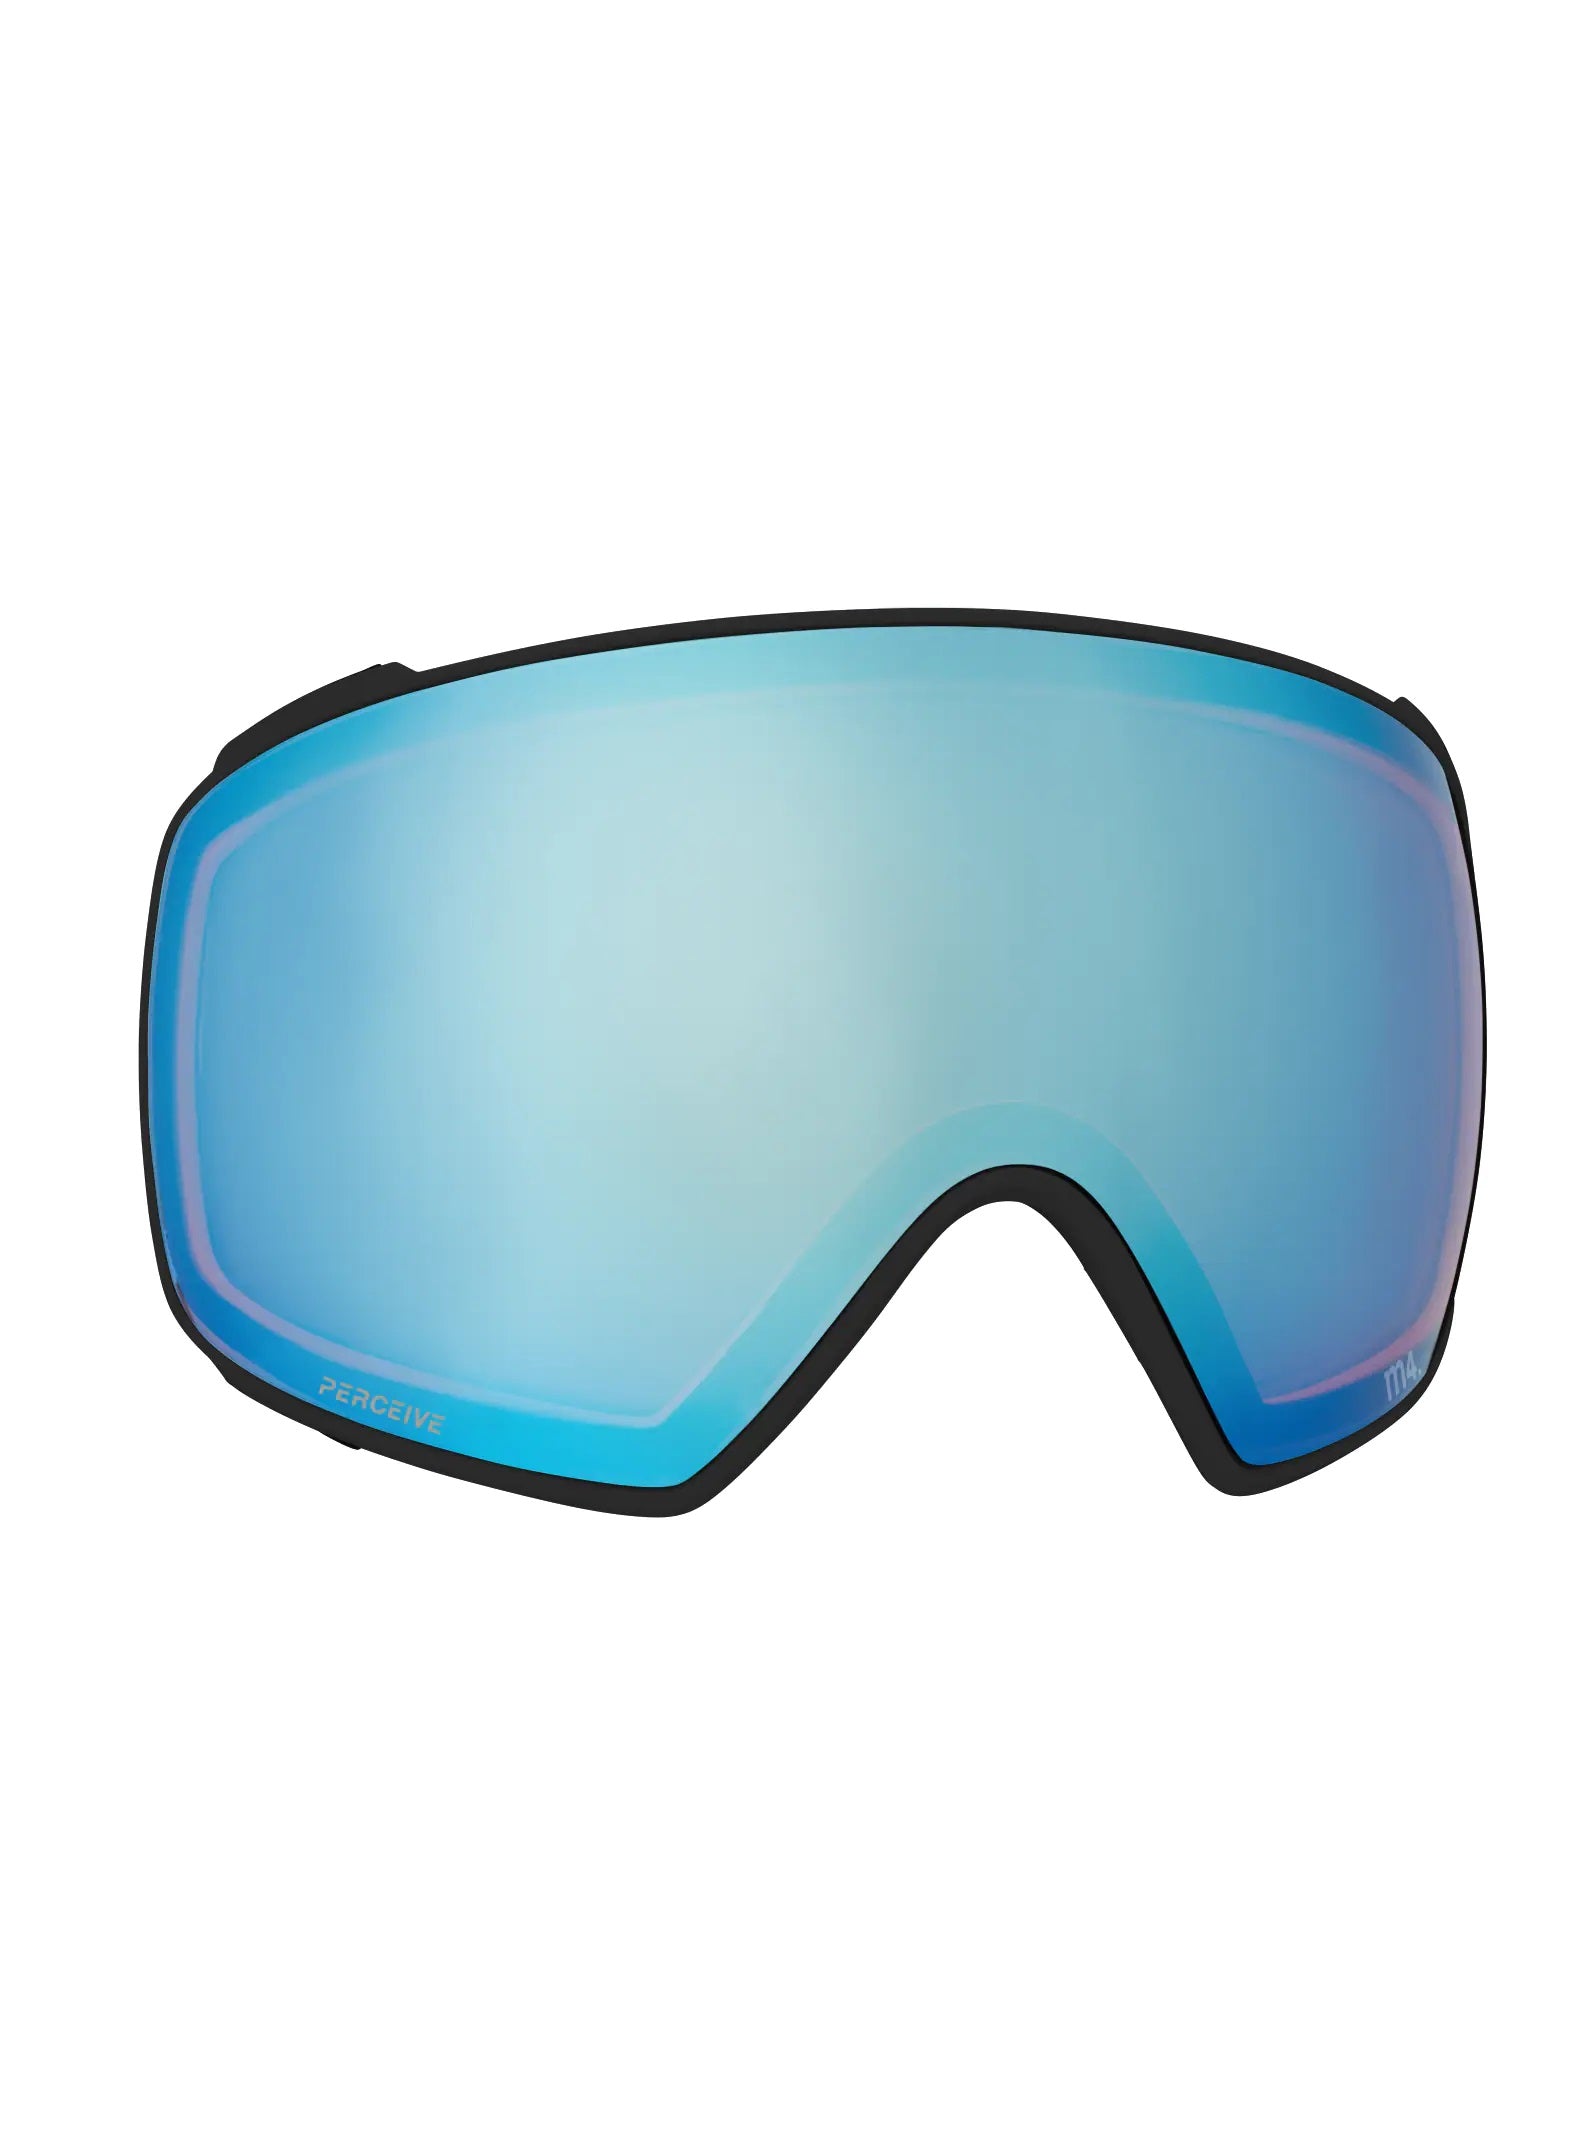 Anon M4 Toric Perceive Goggle Lens Variable Blue